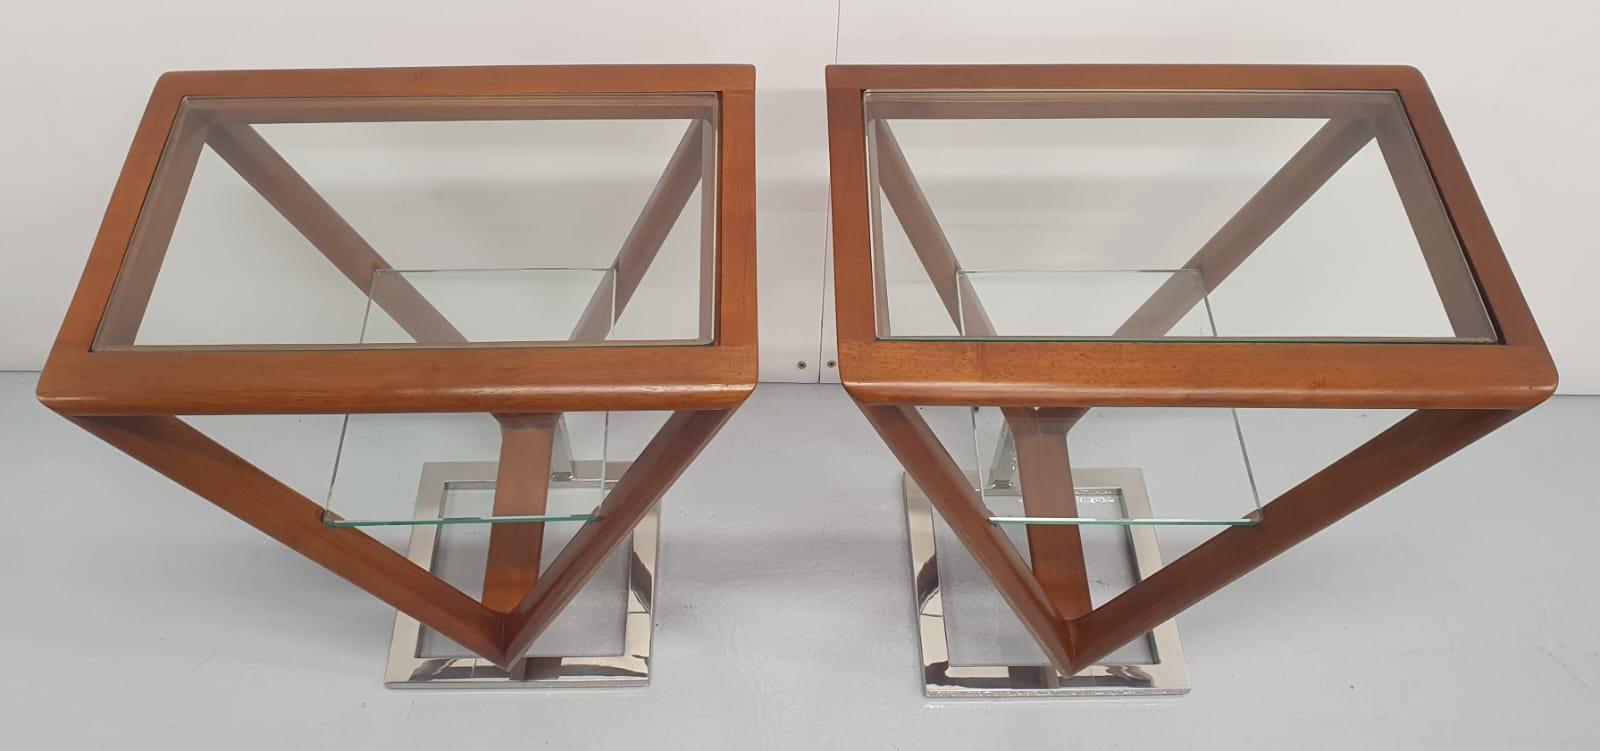 Pair of exceptional quality teak and chrome side tables with glass insert, in the Art Deco style {65 - Image 4 of 4